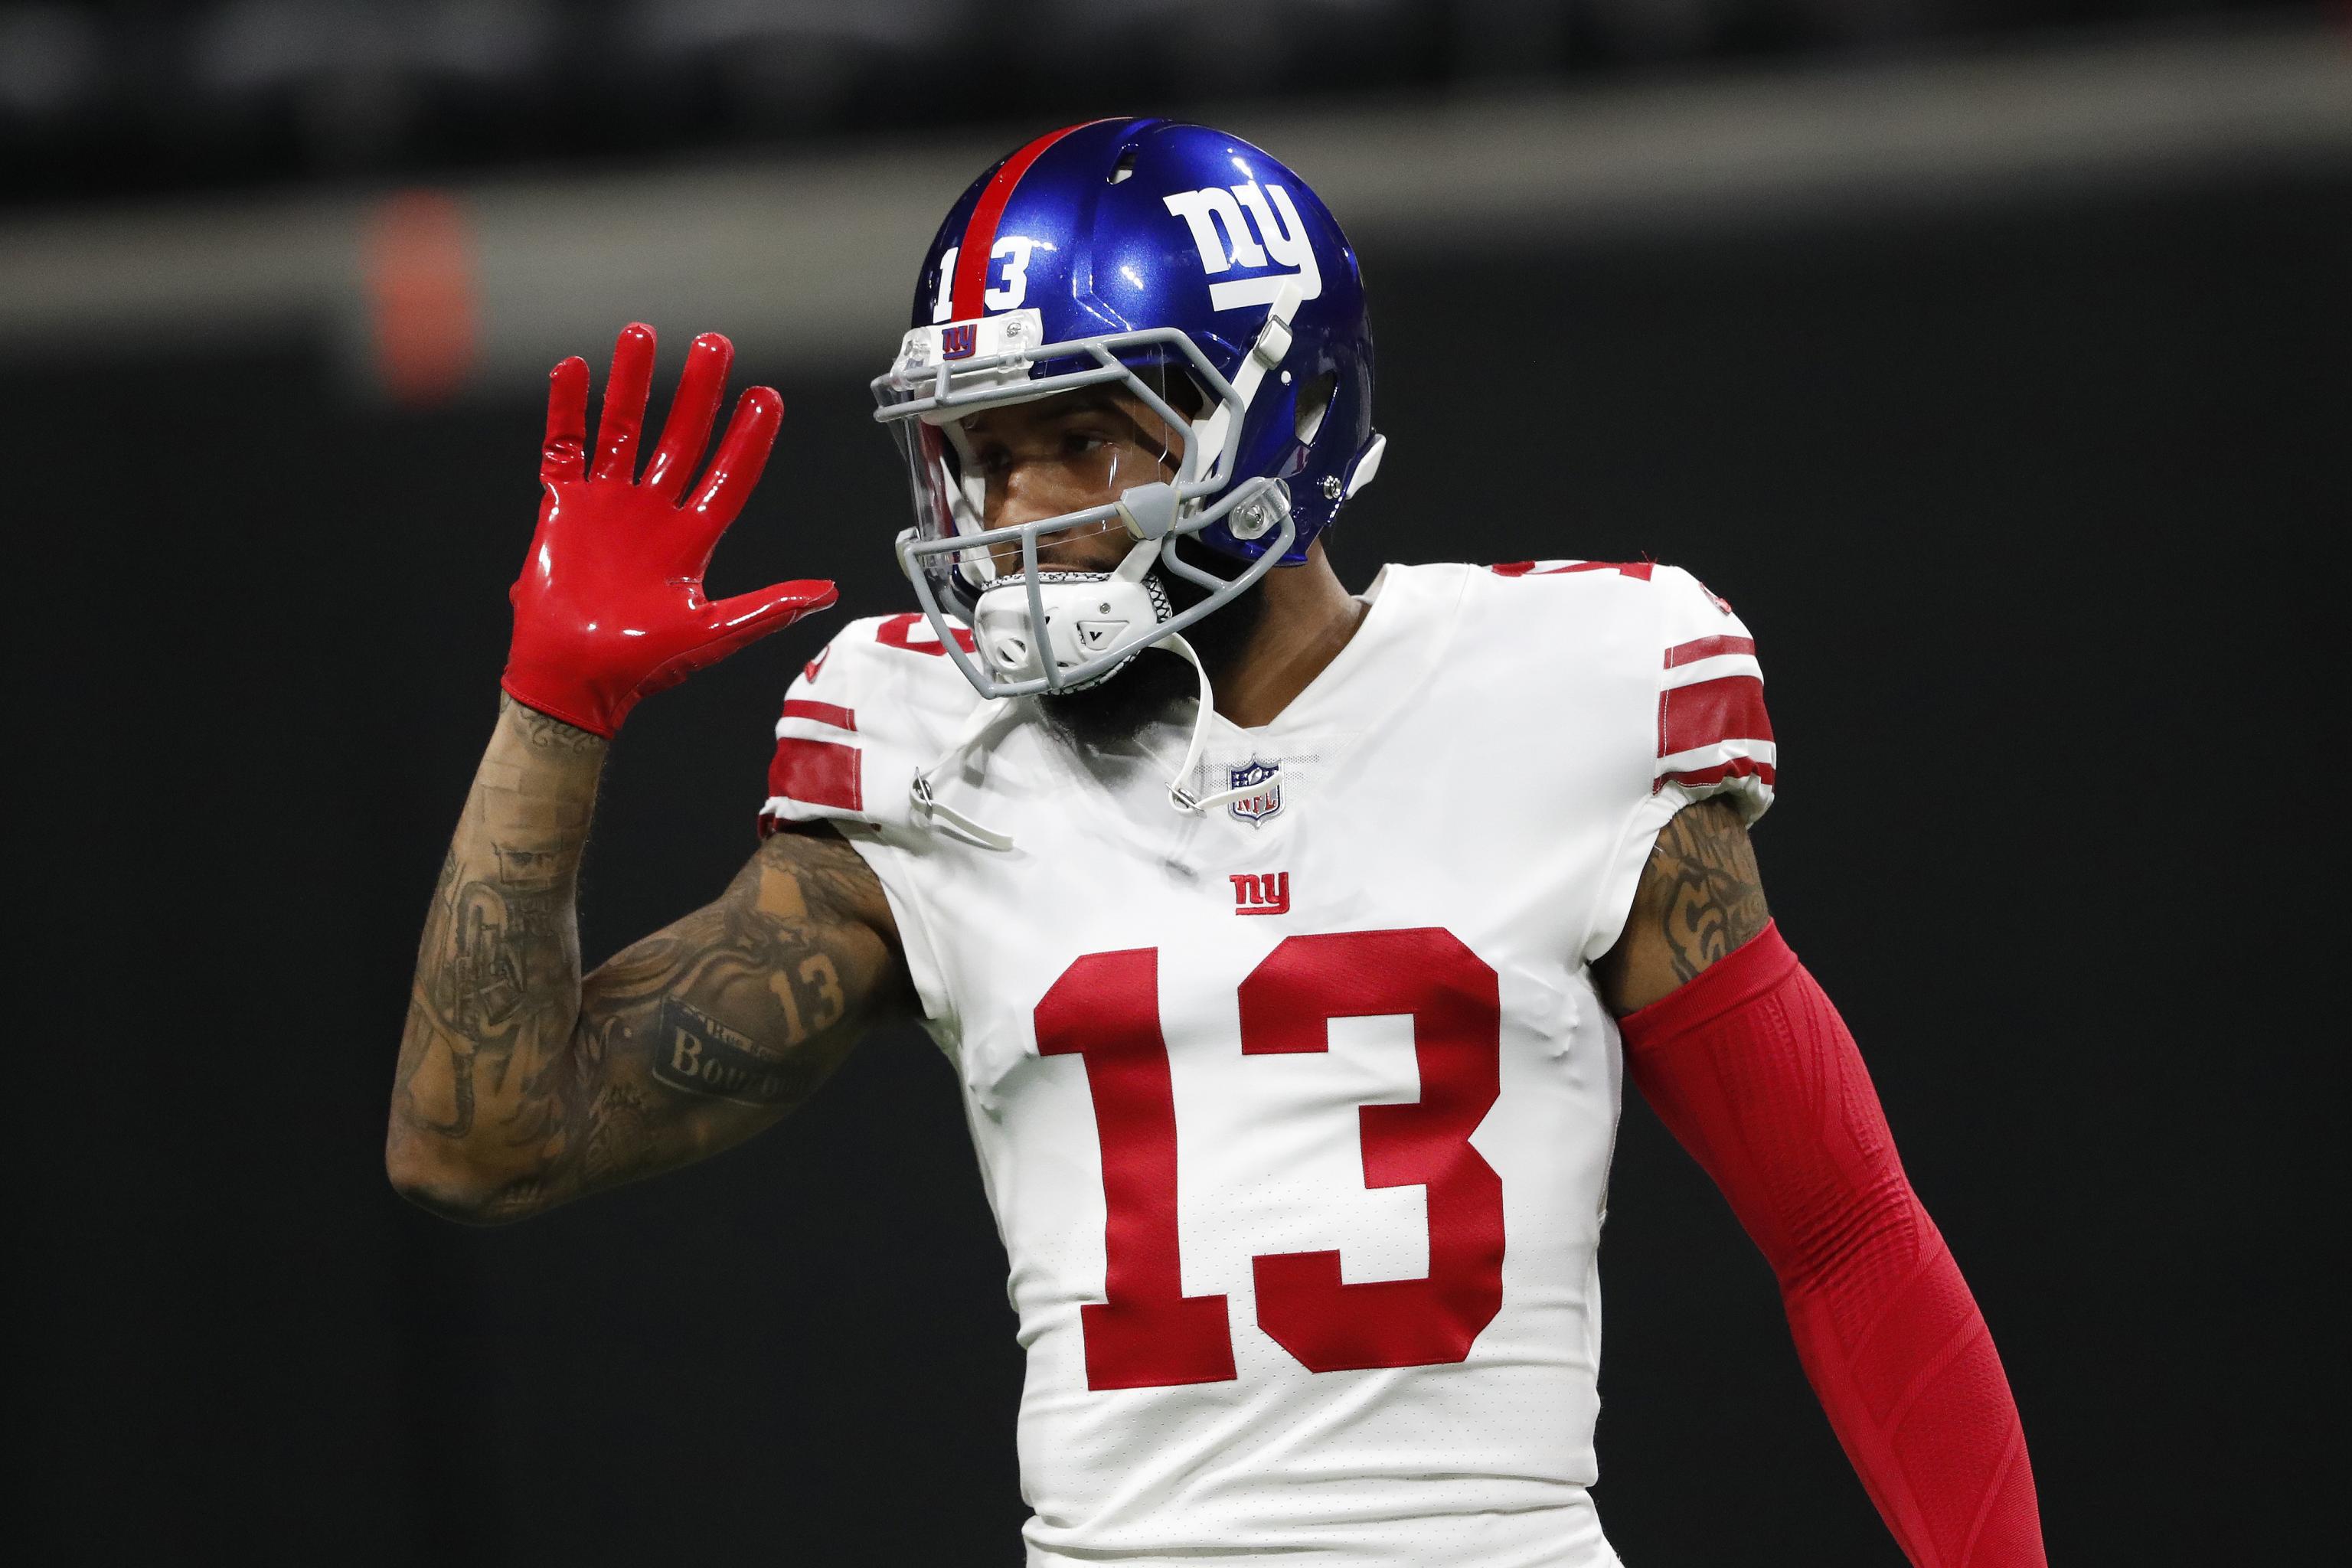 Why dental issue is no excuse for Giants WR Odell Beckham missing Eli  Manning's quarterback camp – New York Daily News